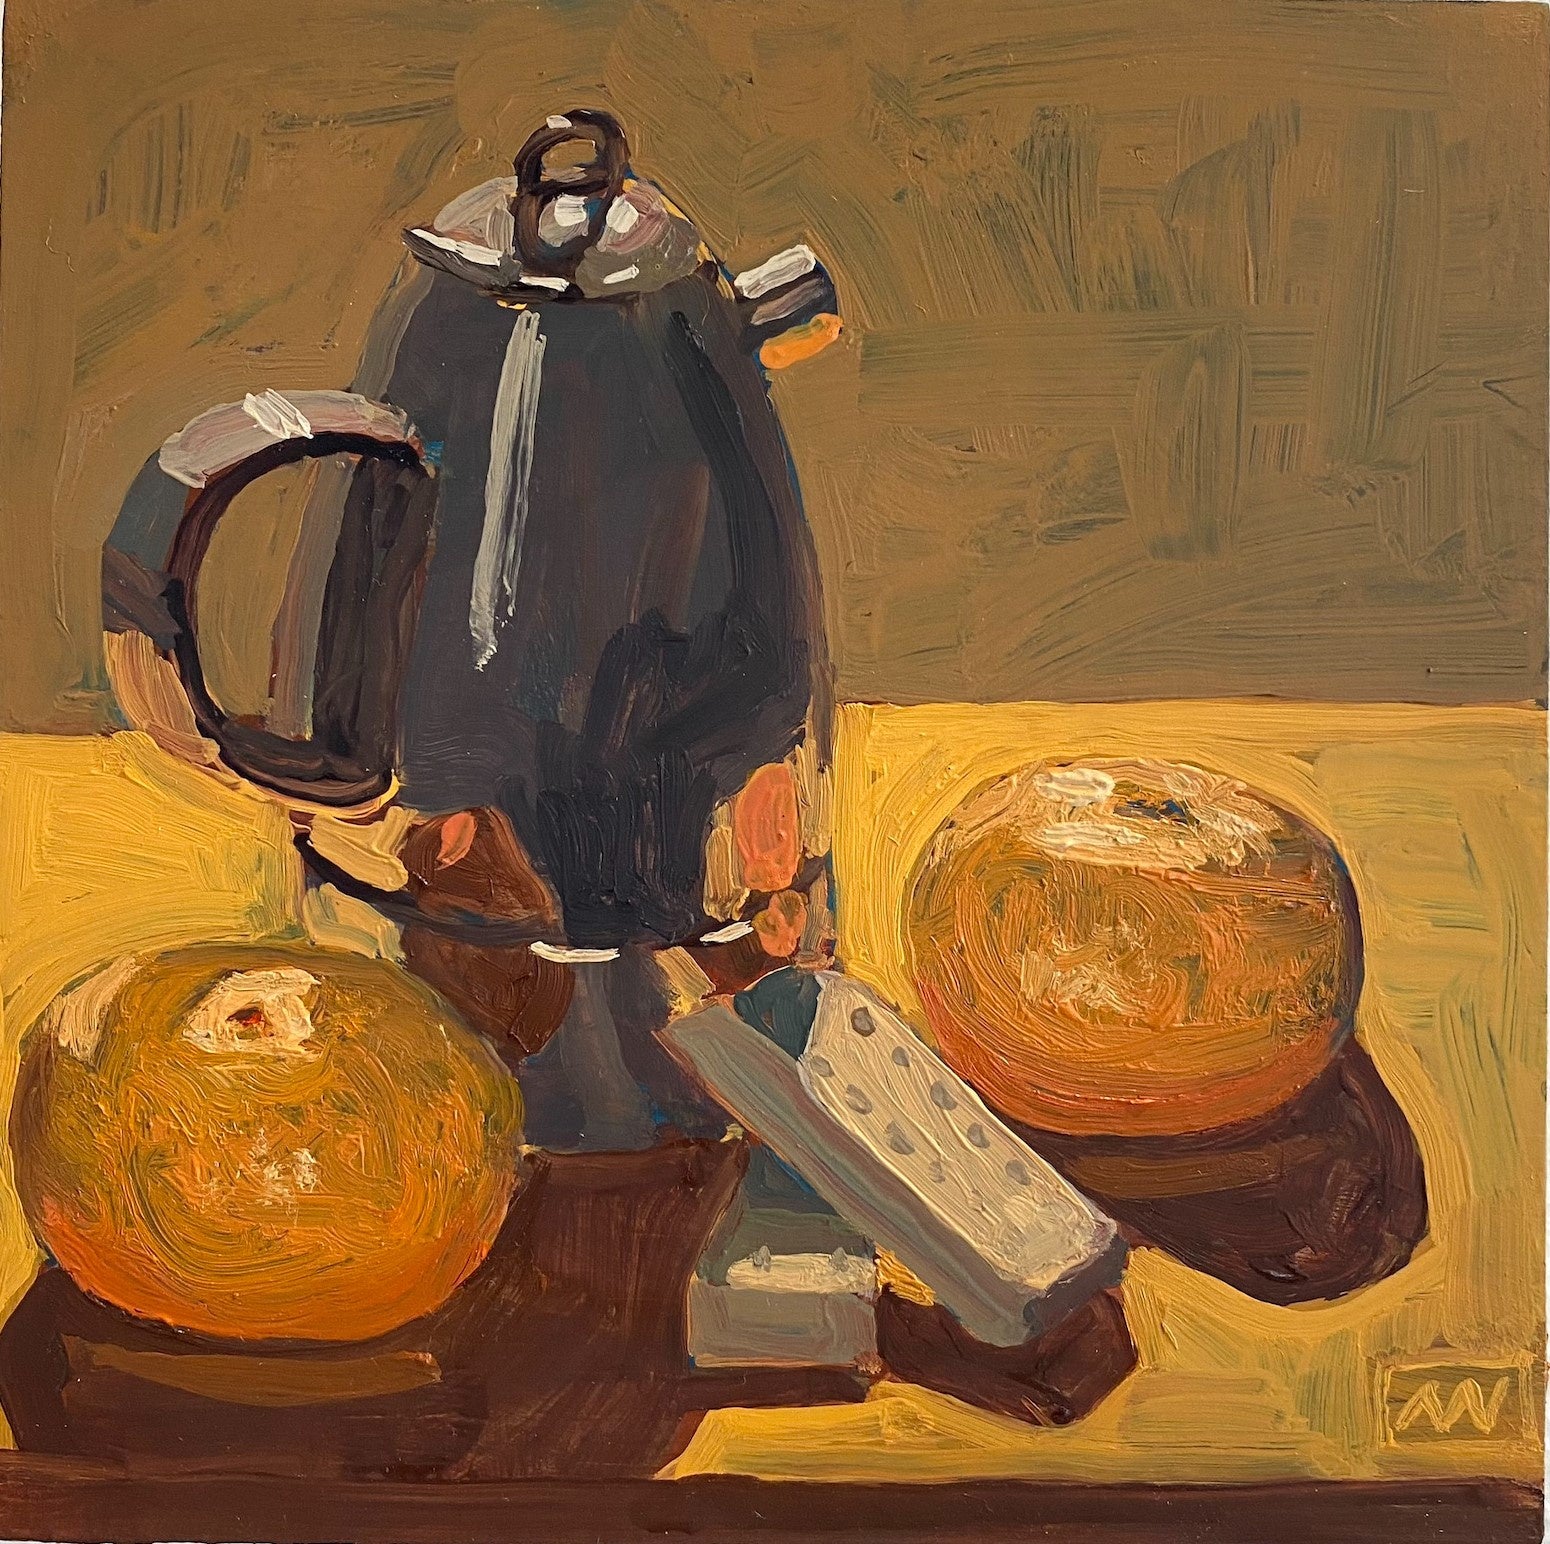 Coffee with Mandarins and Shortbread by Andrea Wilson